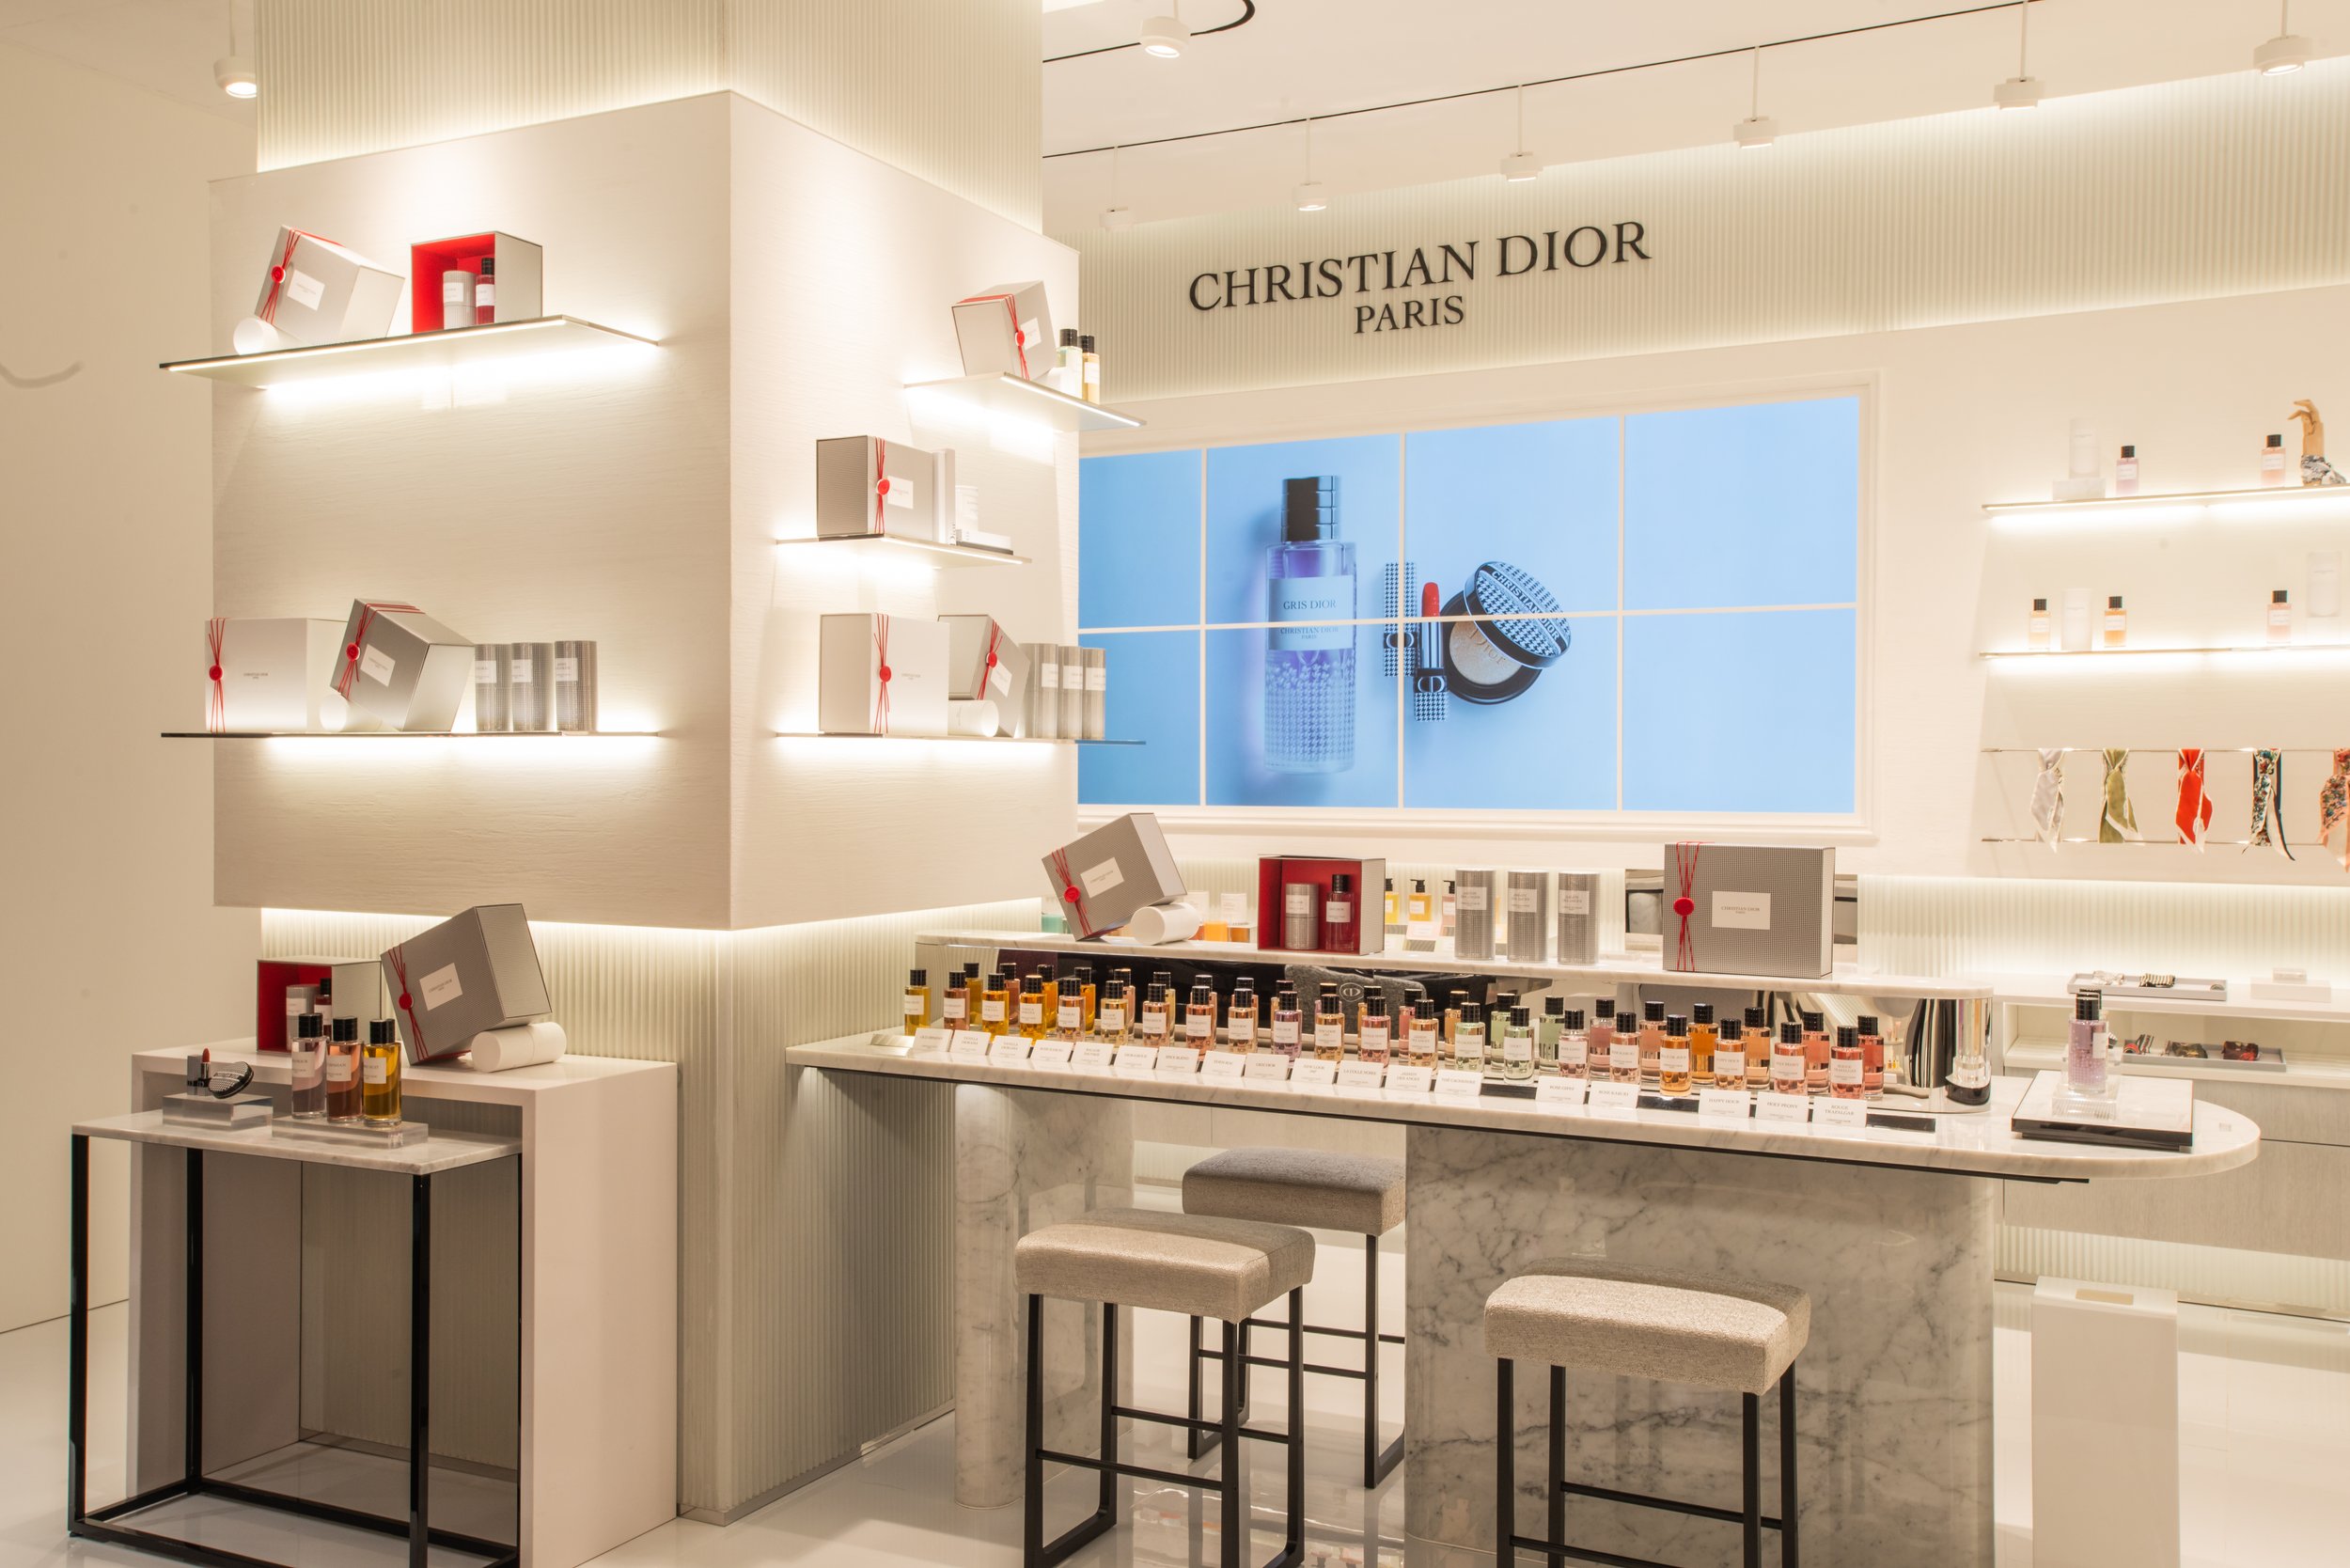 A First Look at Dior Beauty's New Flagship Boutique in Makati